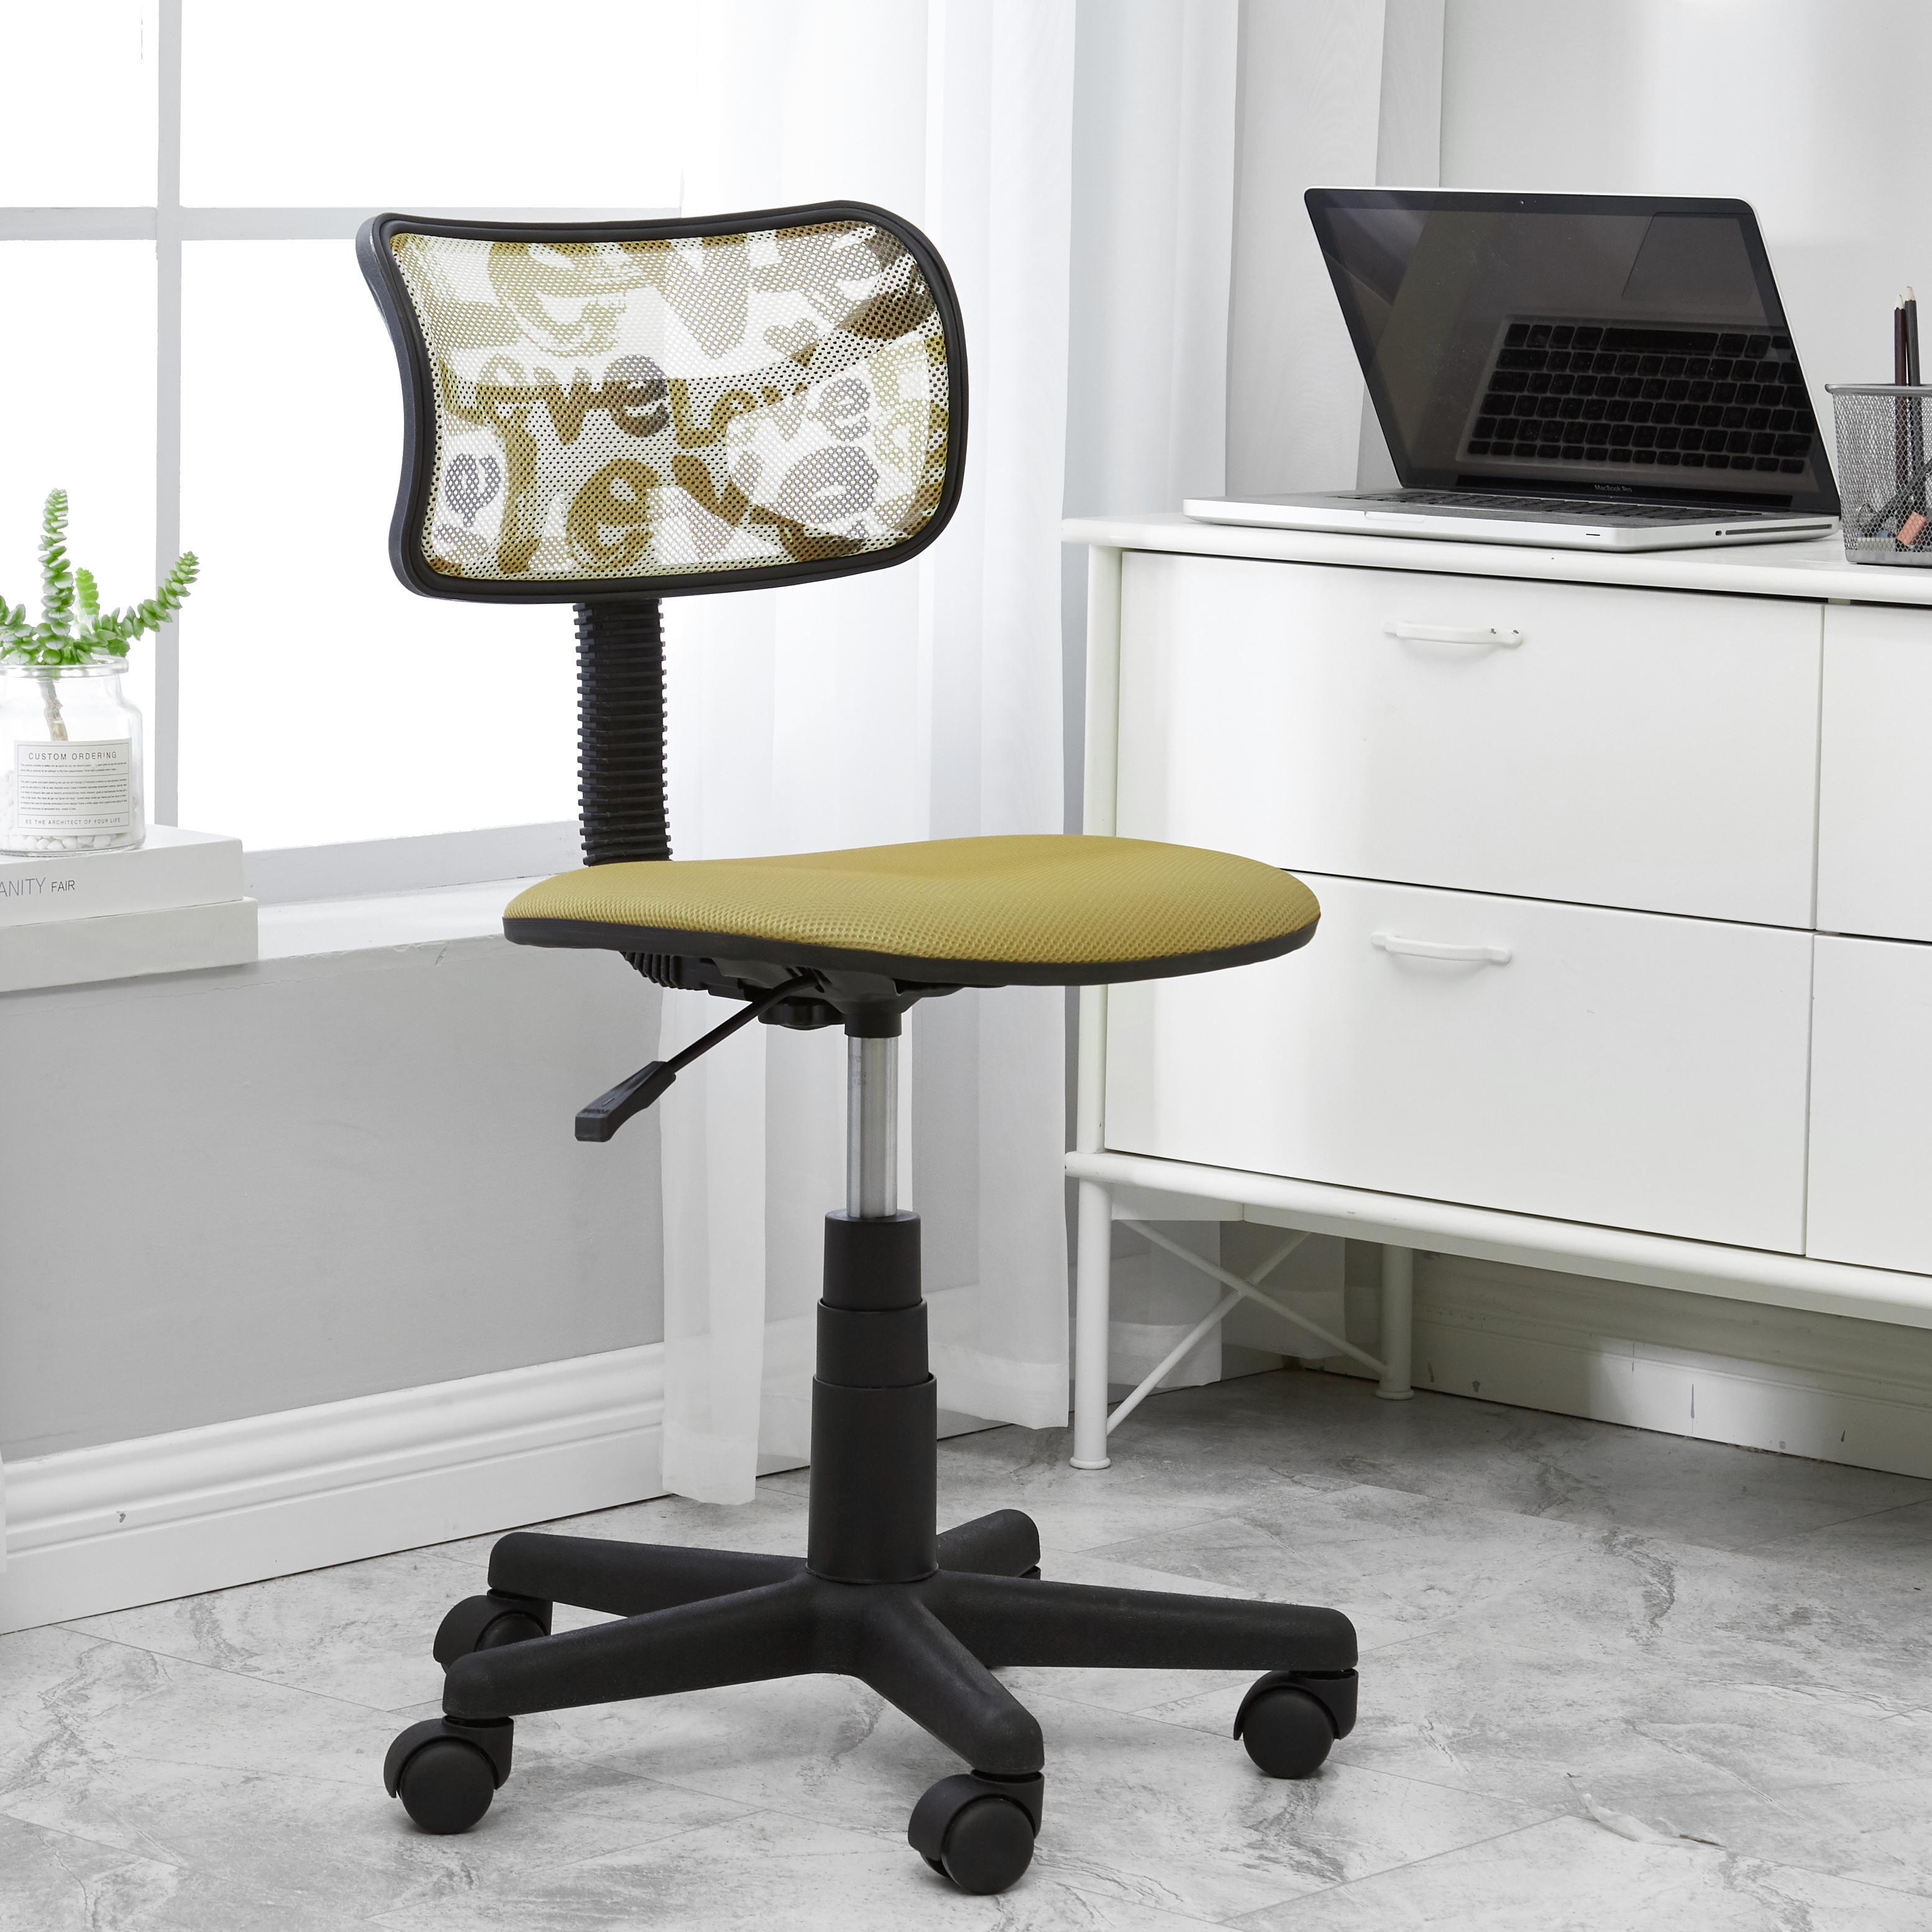 Urban Shop Task Chair with Adjustable Height & Swivel, 225 lb. Capacity, Multiple Colors - image 1 of 14